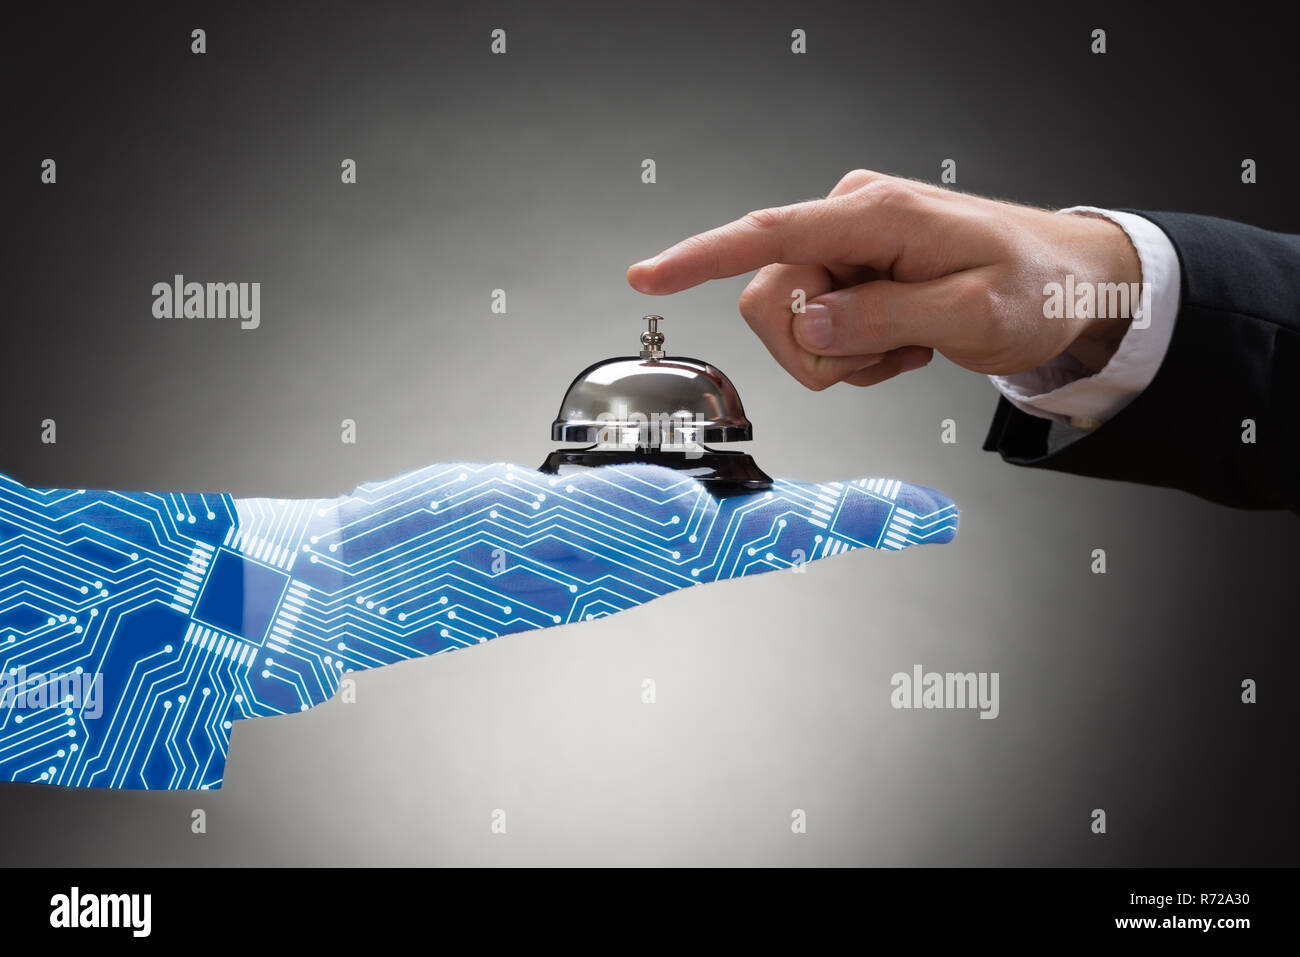 Businessperson's Hand Ringing Service Bell Held By Digital Generated Human Hand On Grey Background Stock Photo